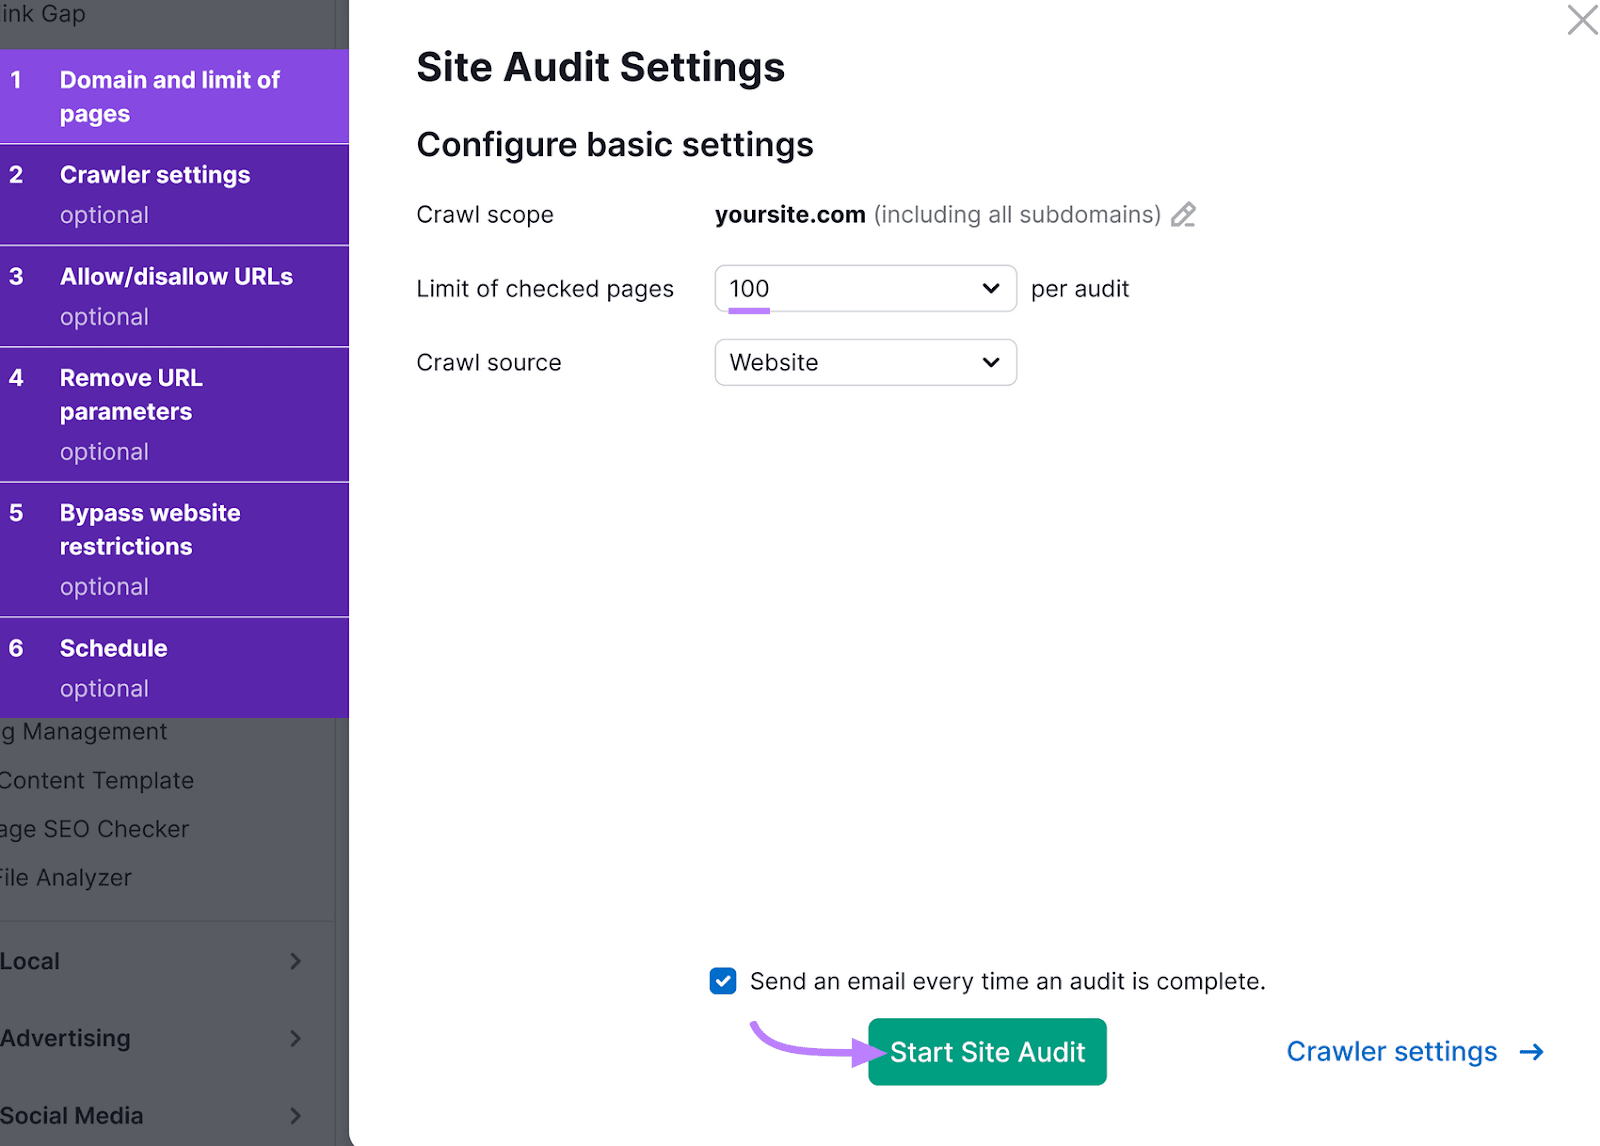 Site Audit Settings showing options to configure basal  settings, with greenish  "Start Site Audit" fastener  highlighted with an arrow.